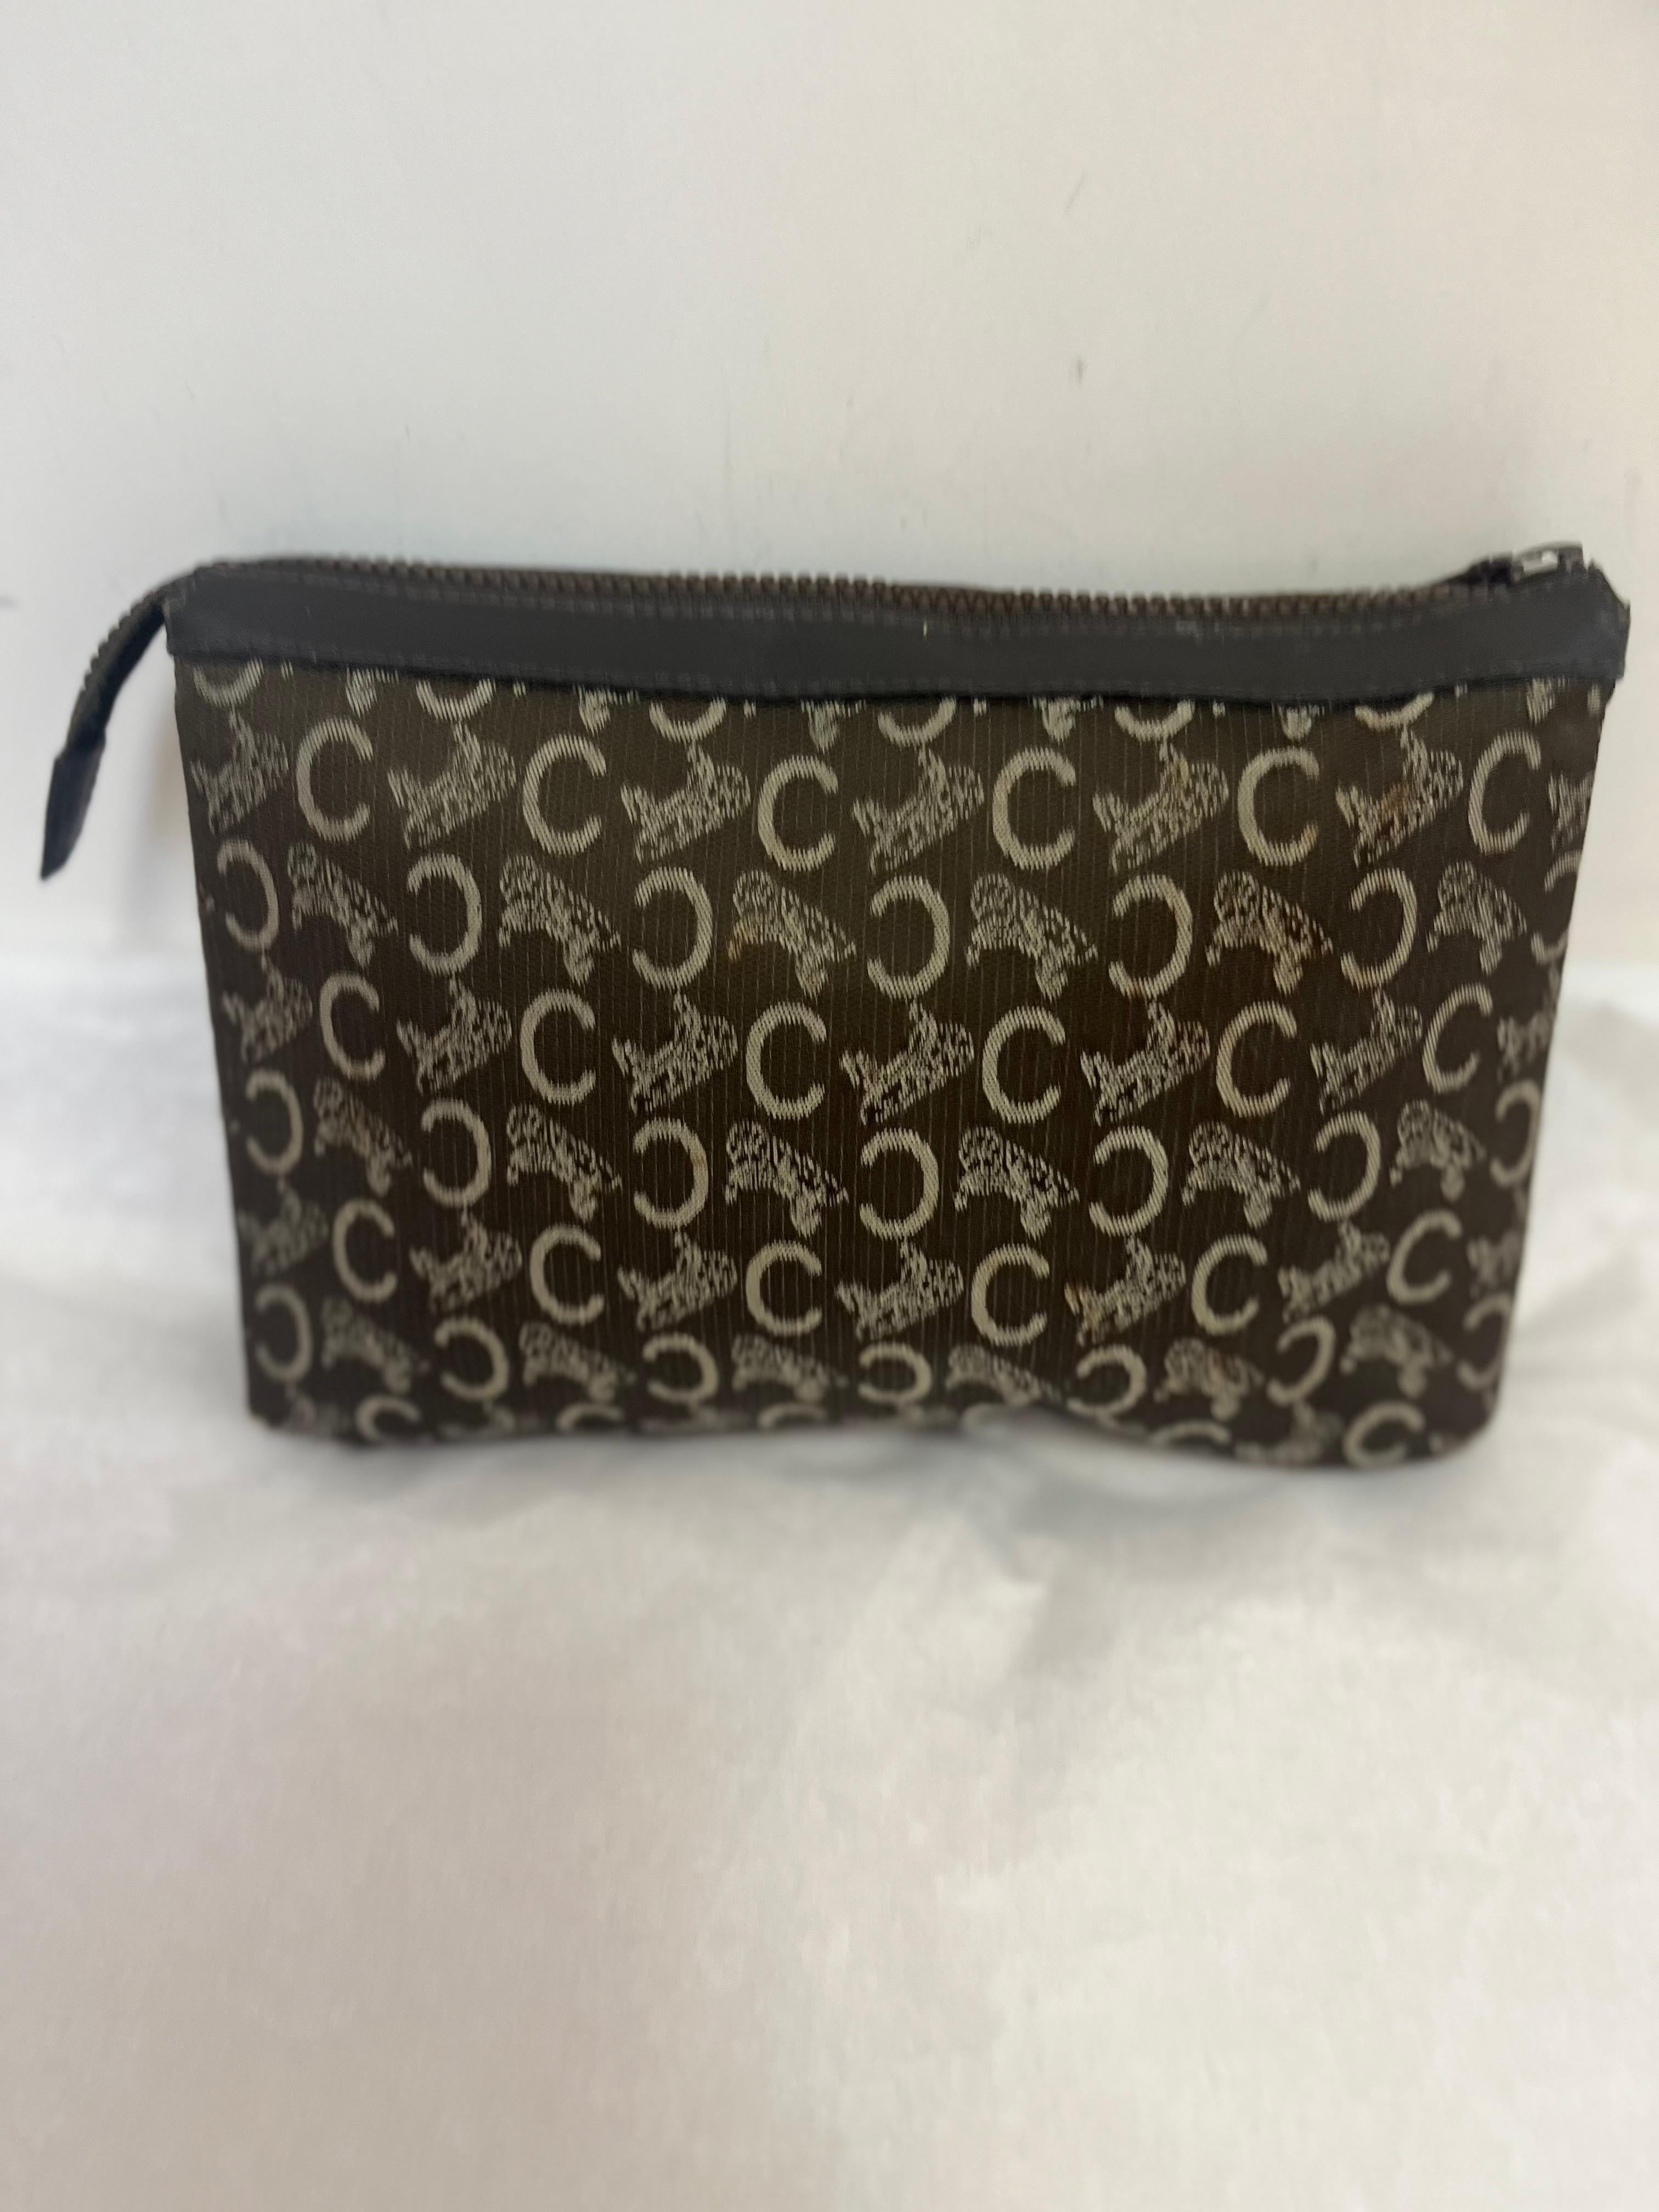 This is a Celine clutch with the original Presbyopia monogram pattern, inspired by the Arc de Triomphe in Paris. The clutch has a top zip closure and a black leather lining.
The escutcheon on the front features the name Celine and a horse a